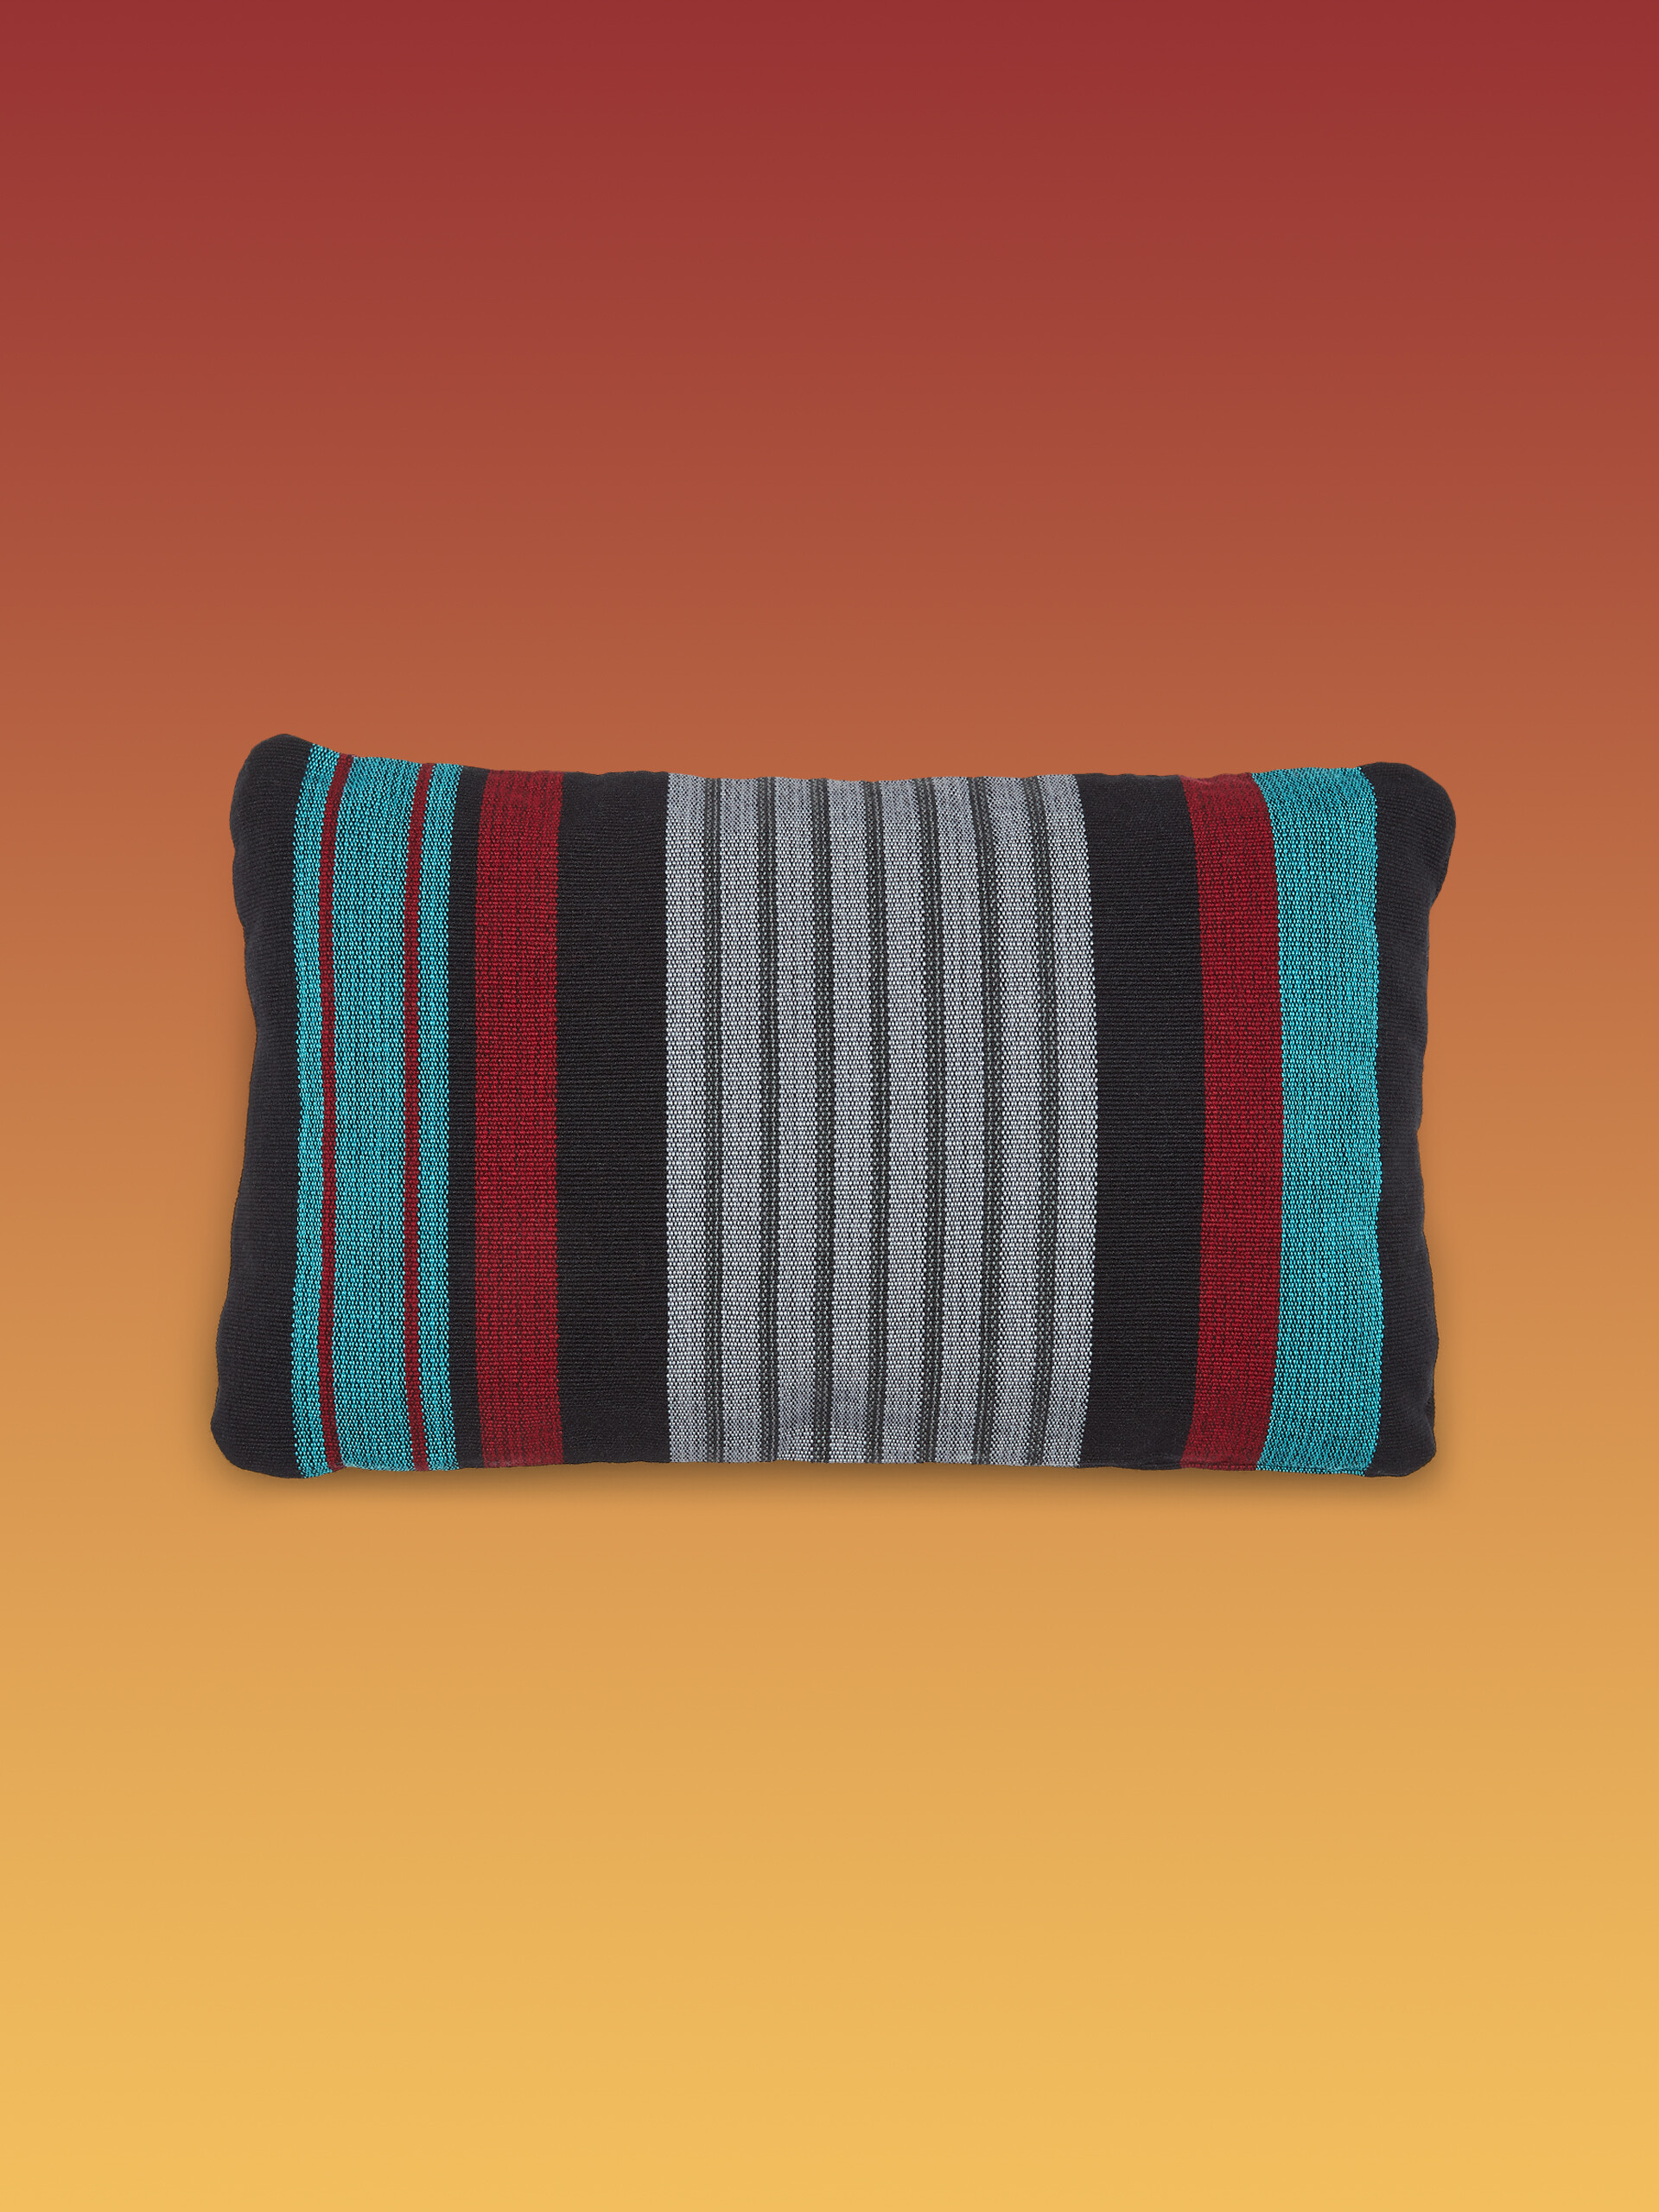 MARNI MARKET rectangular pillow cover in polyester with pale blue burgundy and black vertical stripes - Furniture - Image 1